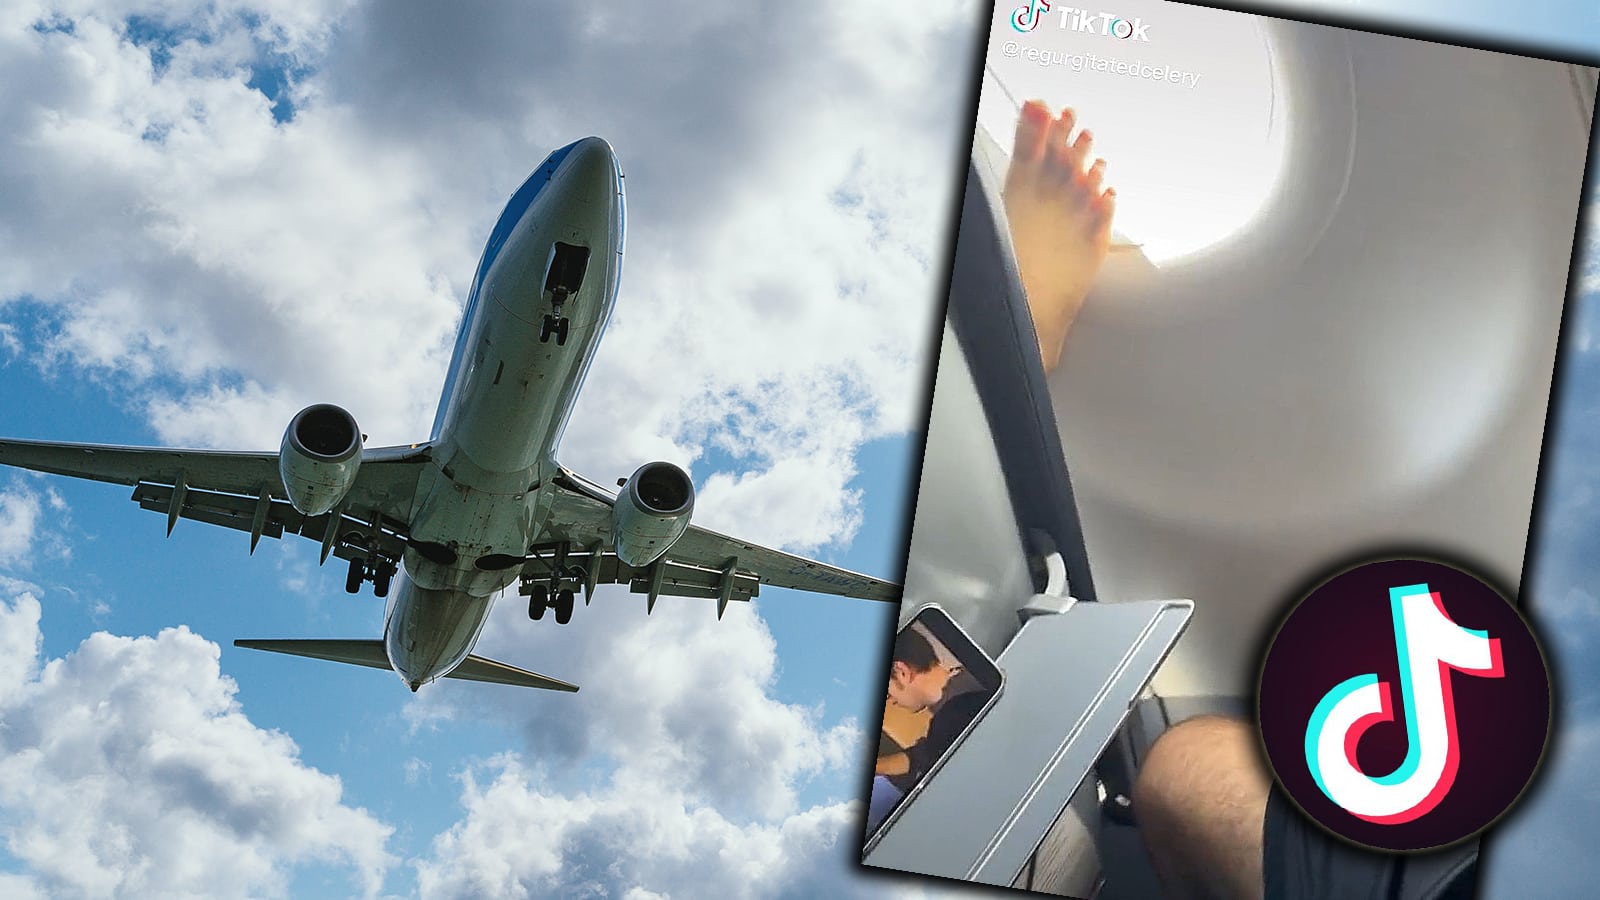 No One Can Figure Out How This Person Closed A Plane Window With Their Foot  In Viral Tiktok - Dexerto